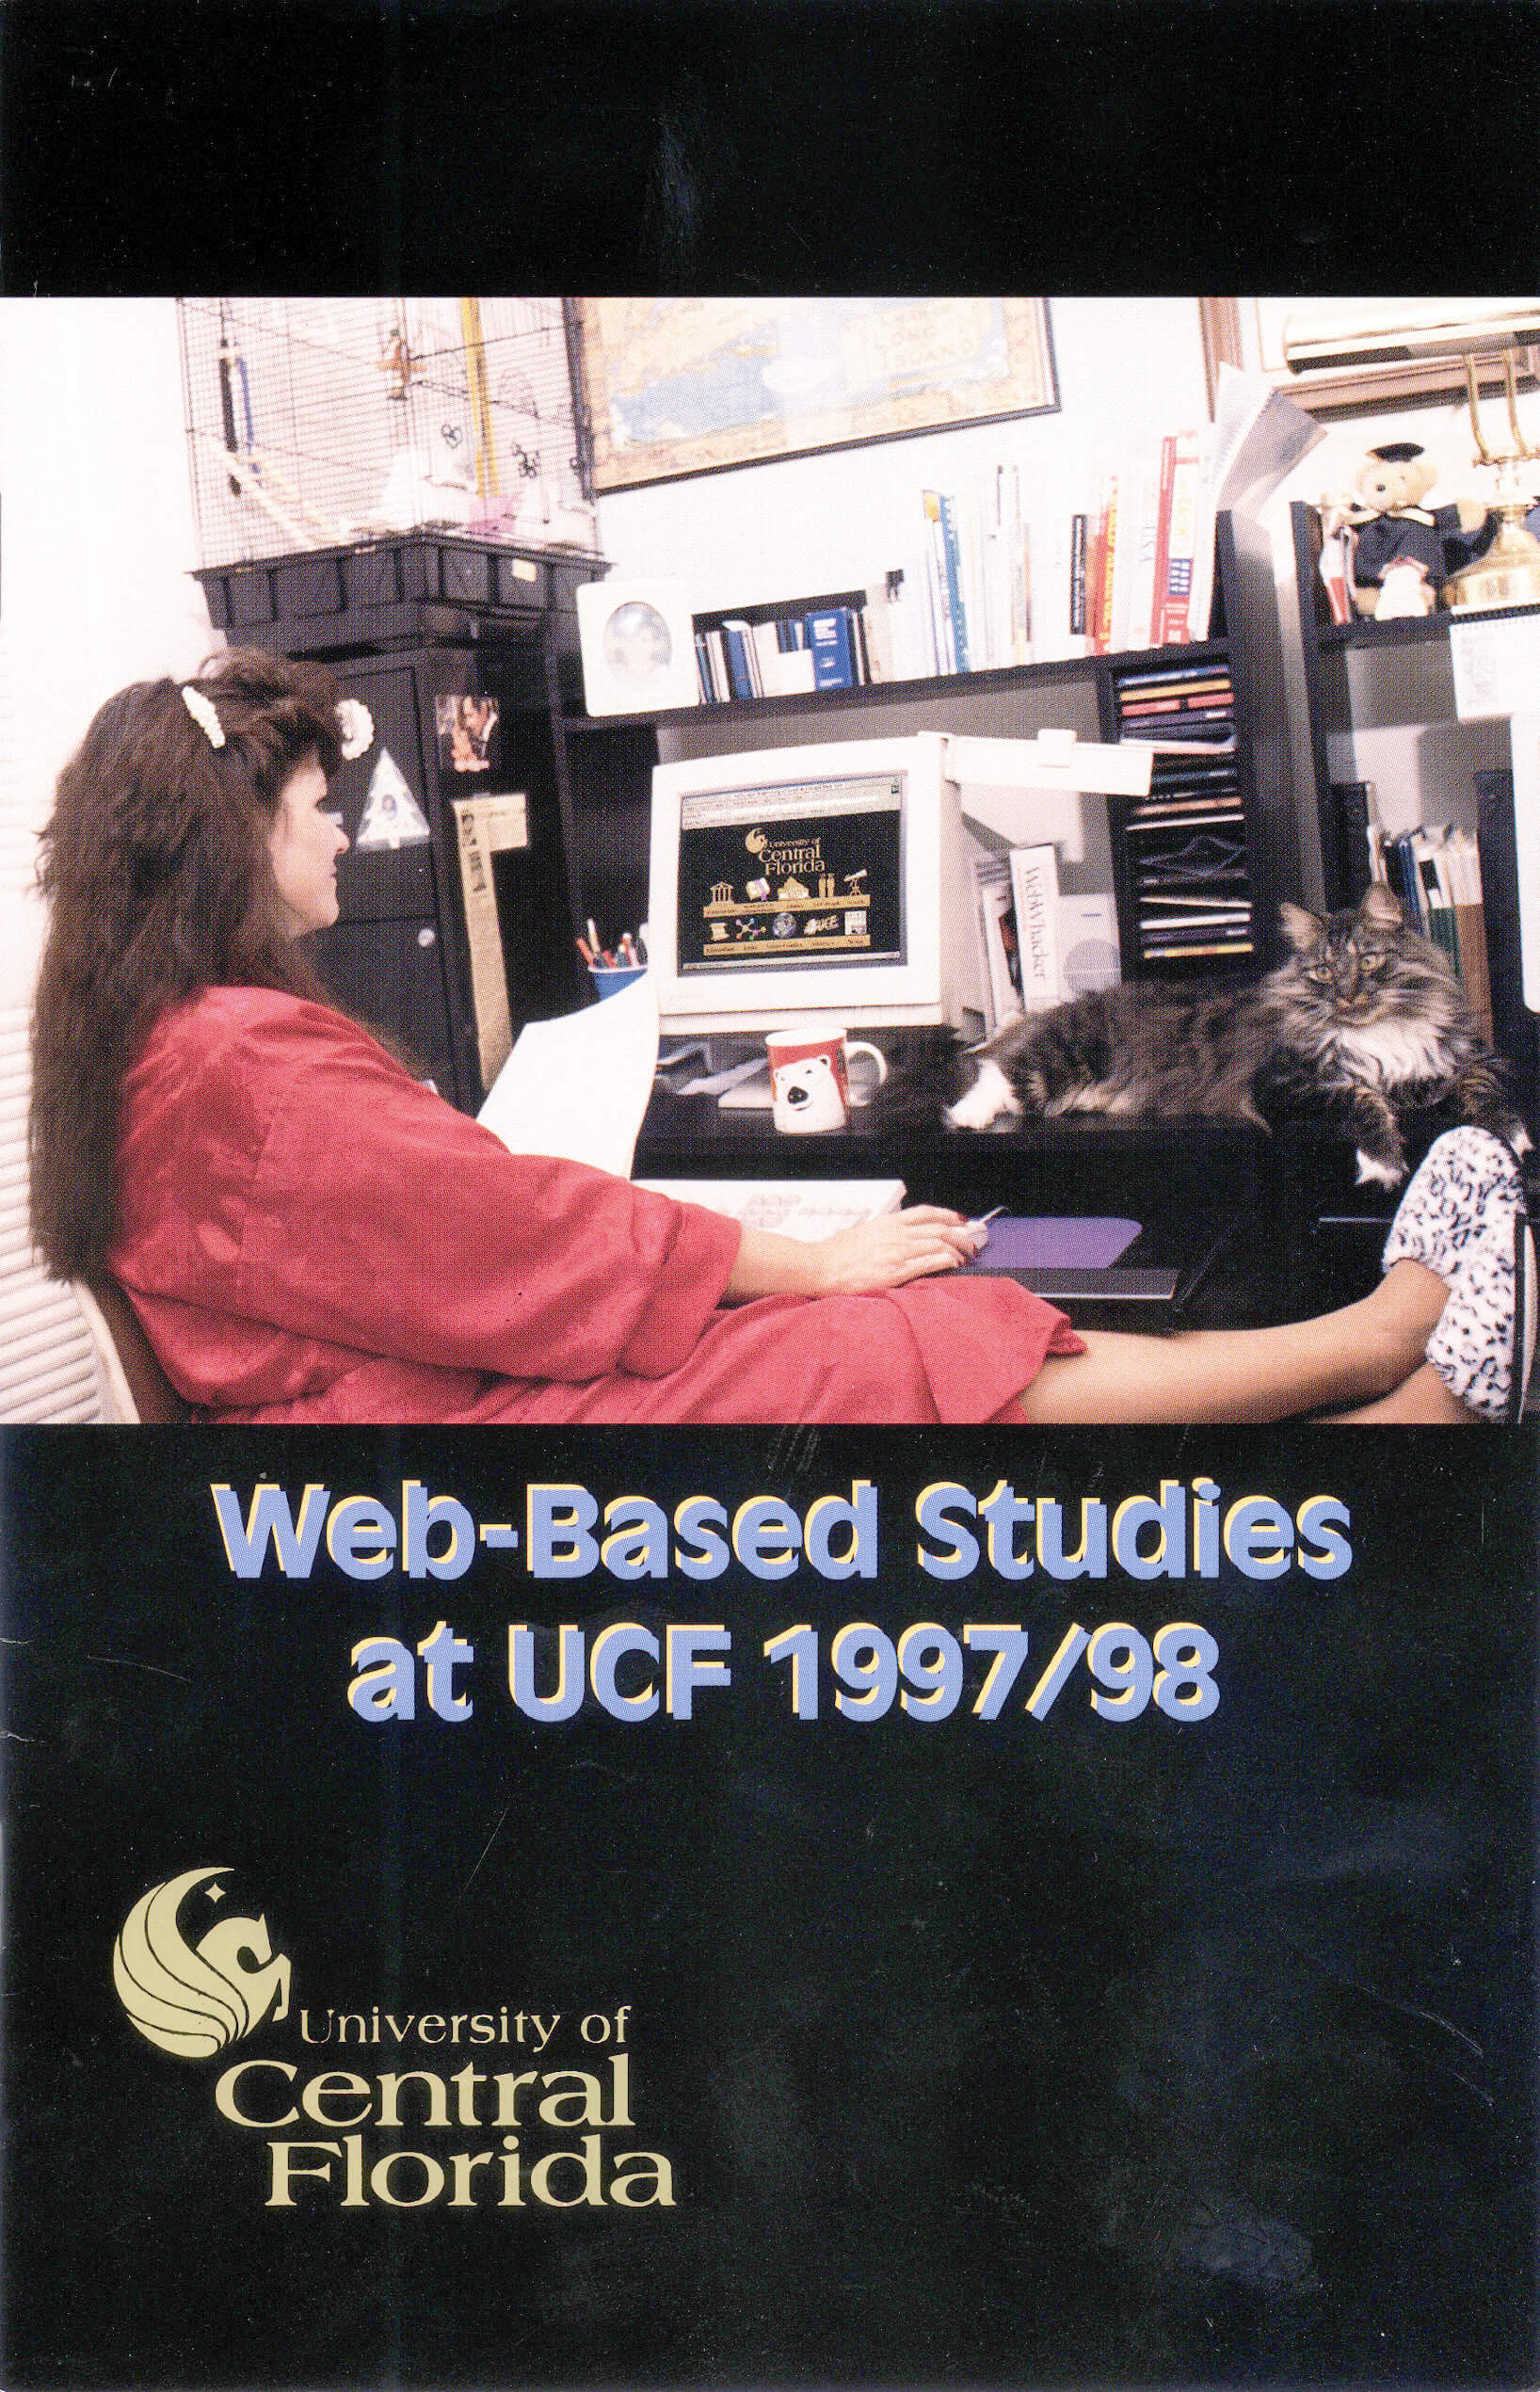 An early brochure for online courses featuring Barbara in slippers with her cat at her side.